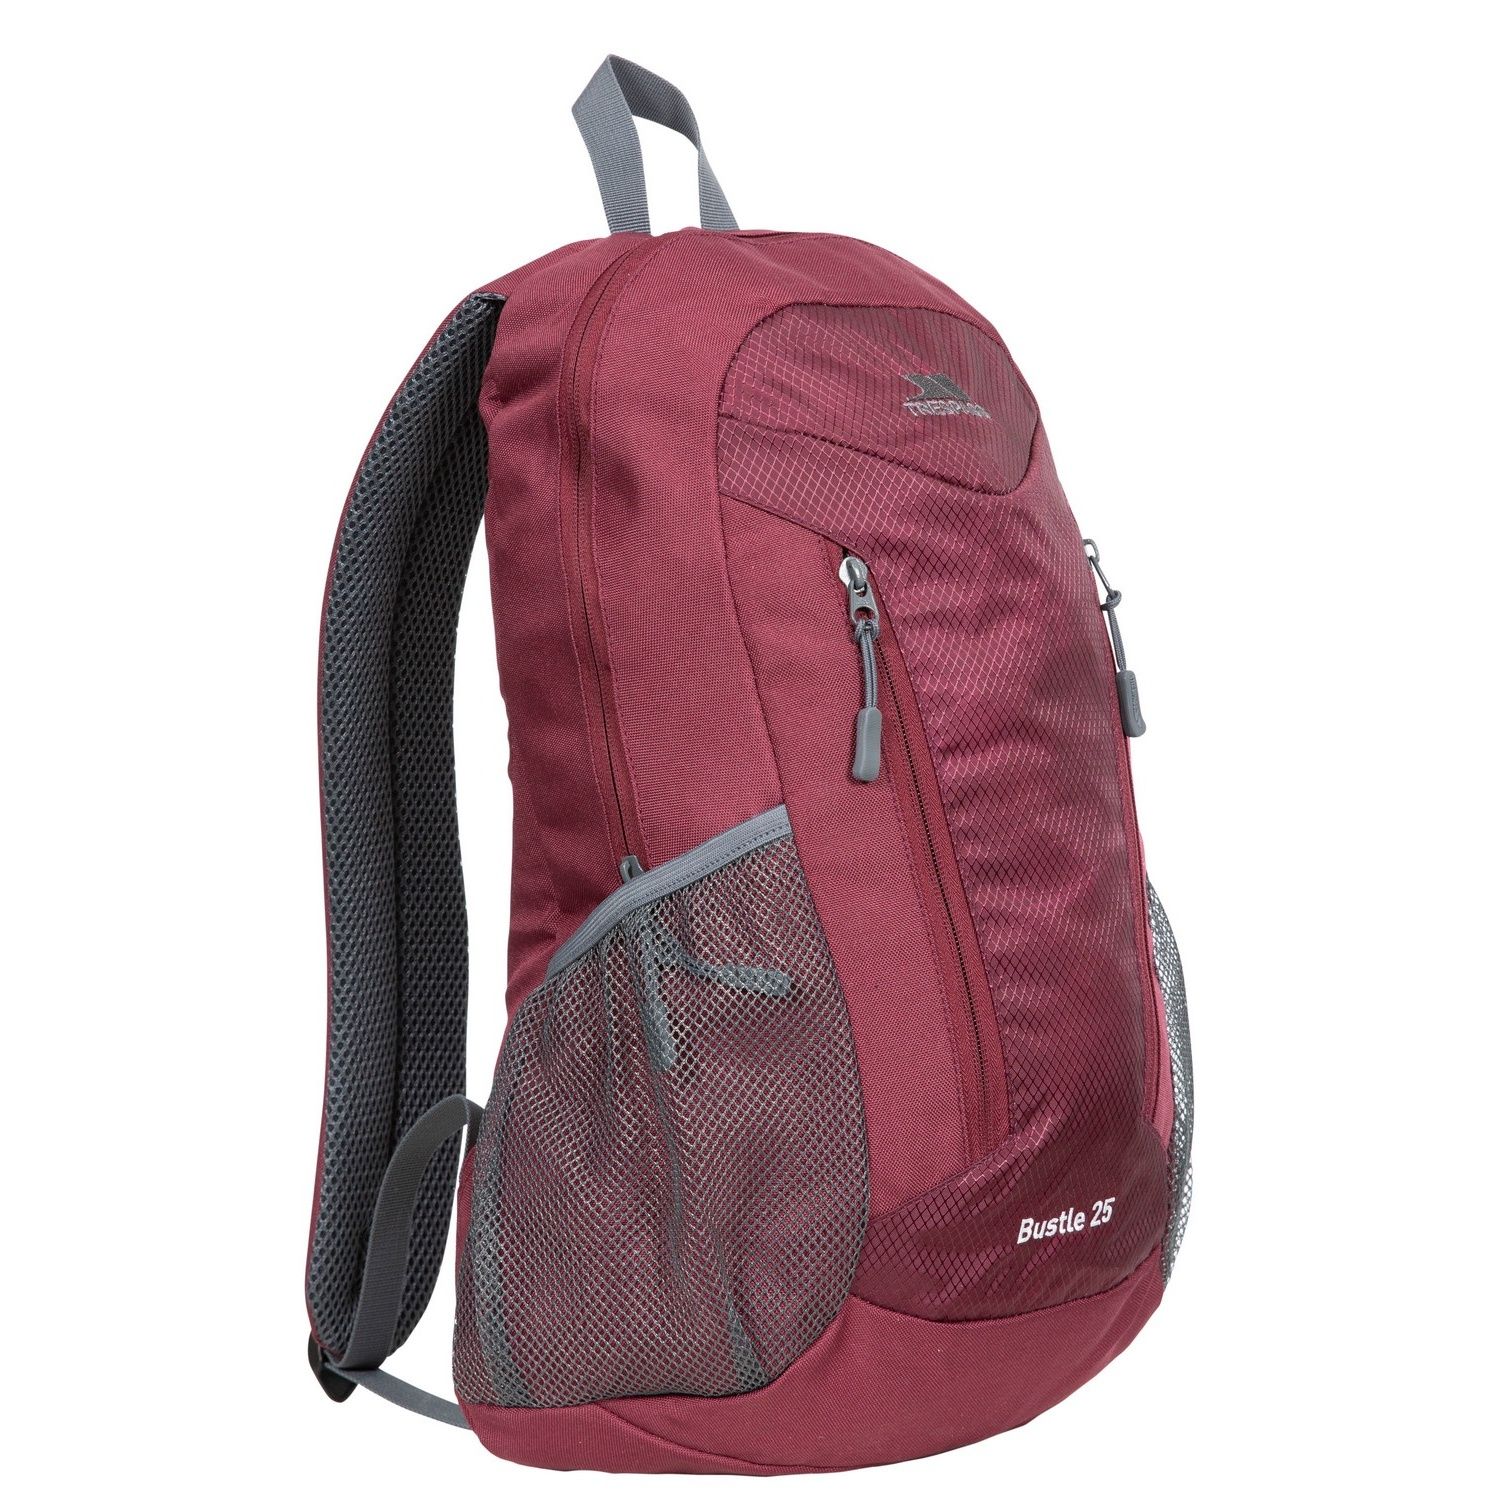 Material: 100% 600D polyester. 25L capacity. 3 zipped sections. Internal laptop pocket. 2 mesh side pockets.